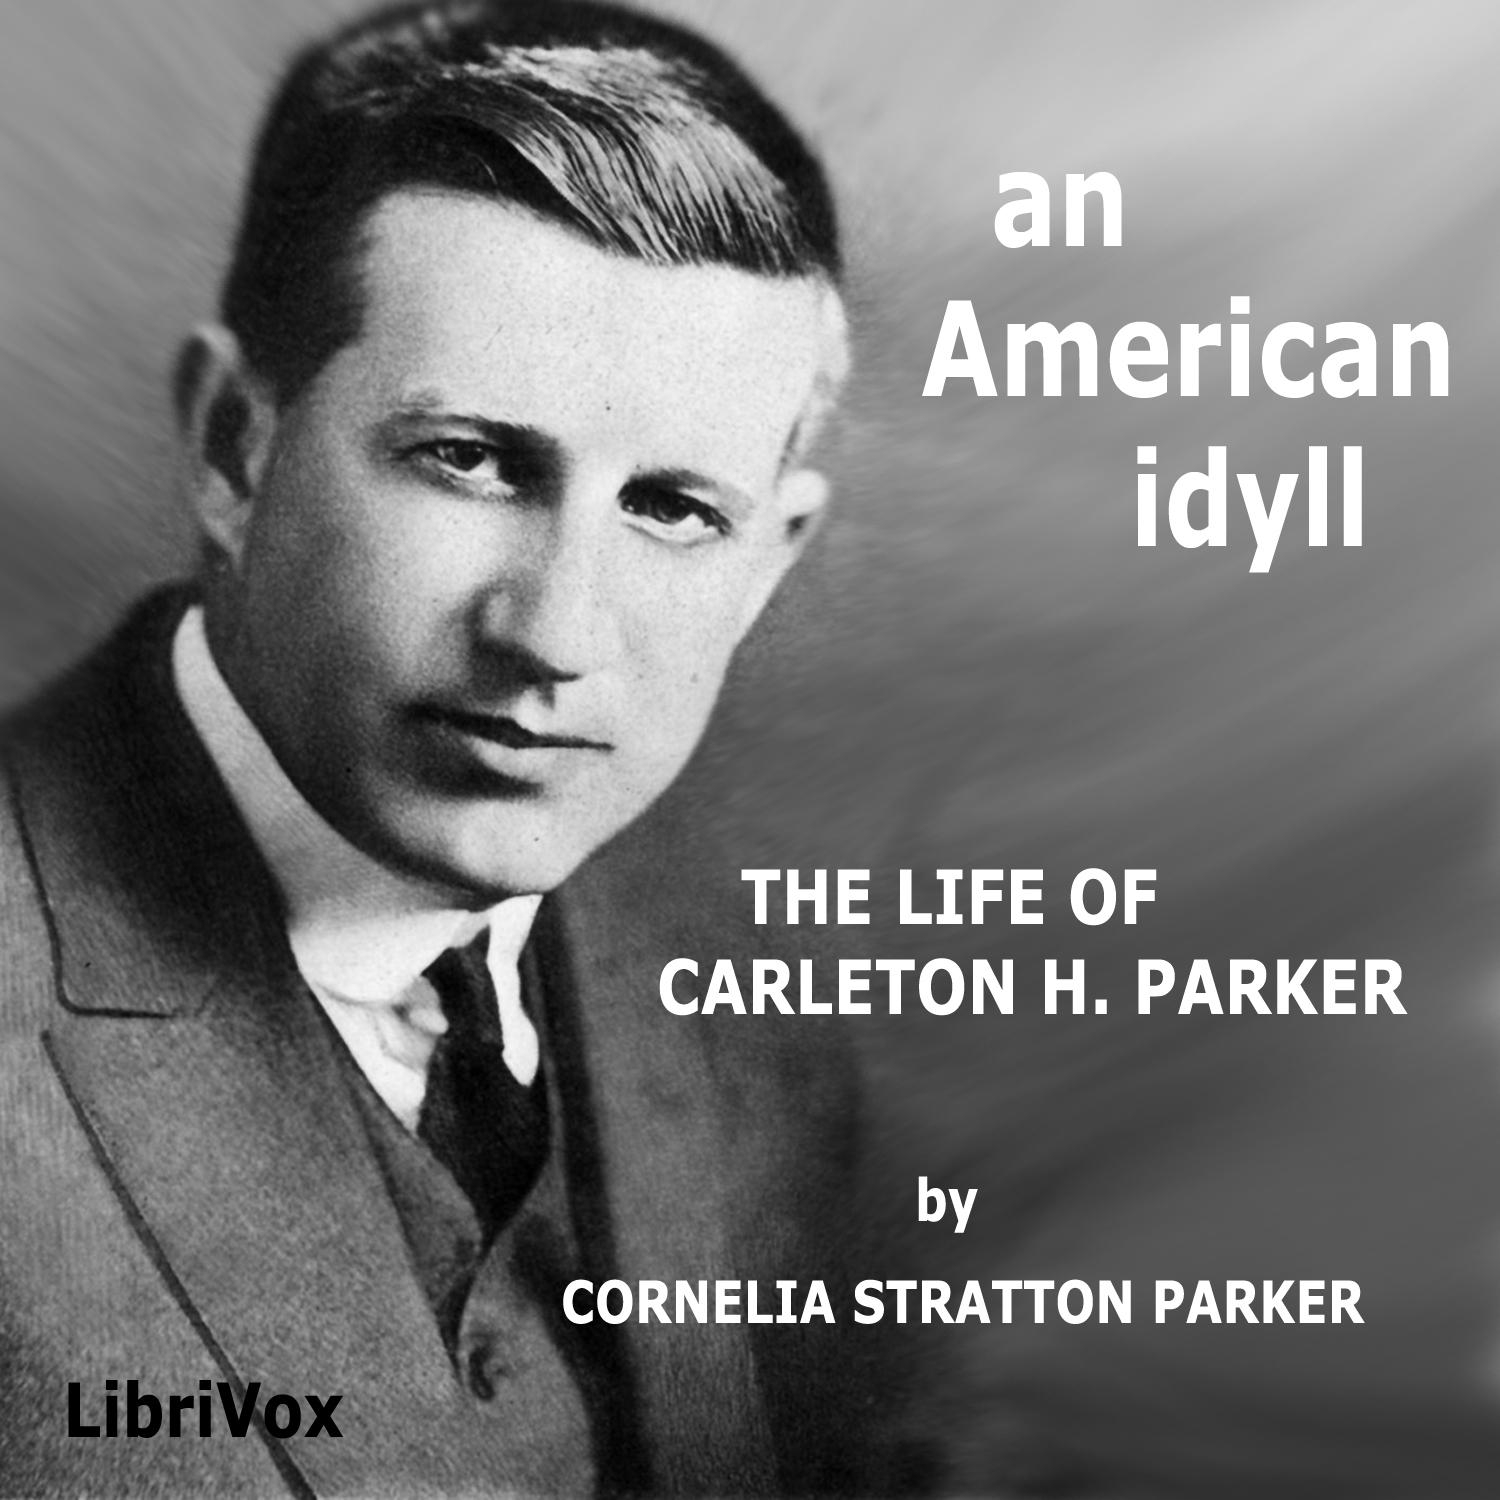 An American Idyll: The Life of Carlton H. Parker, #10 - Chapter IX